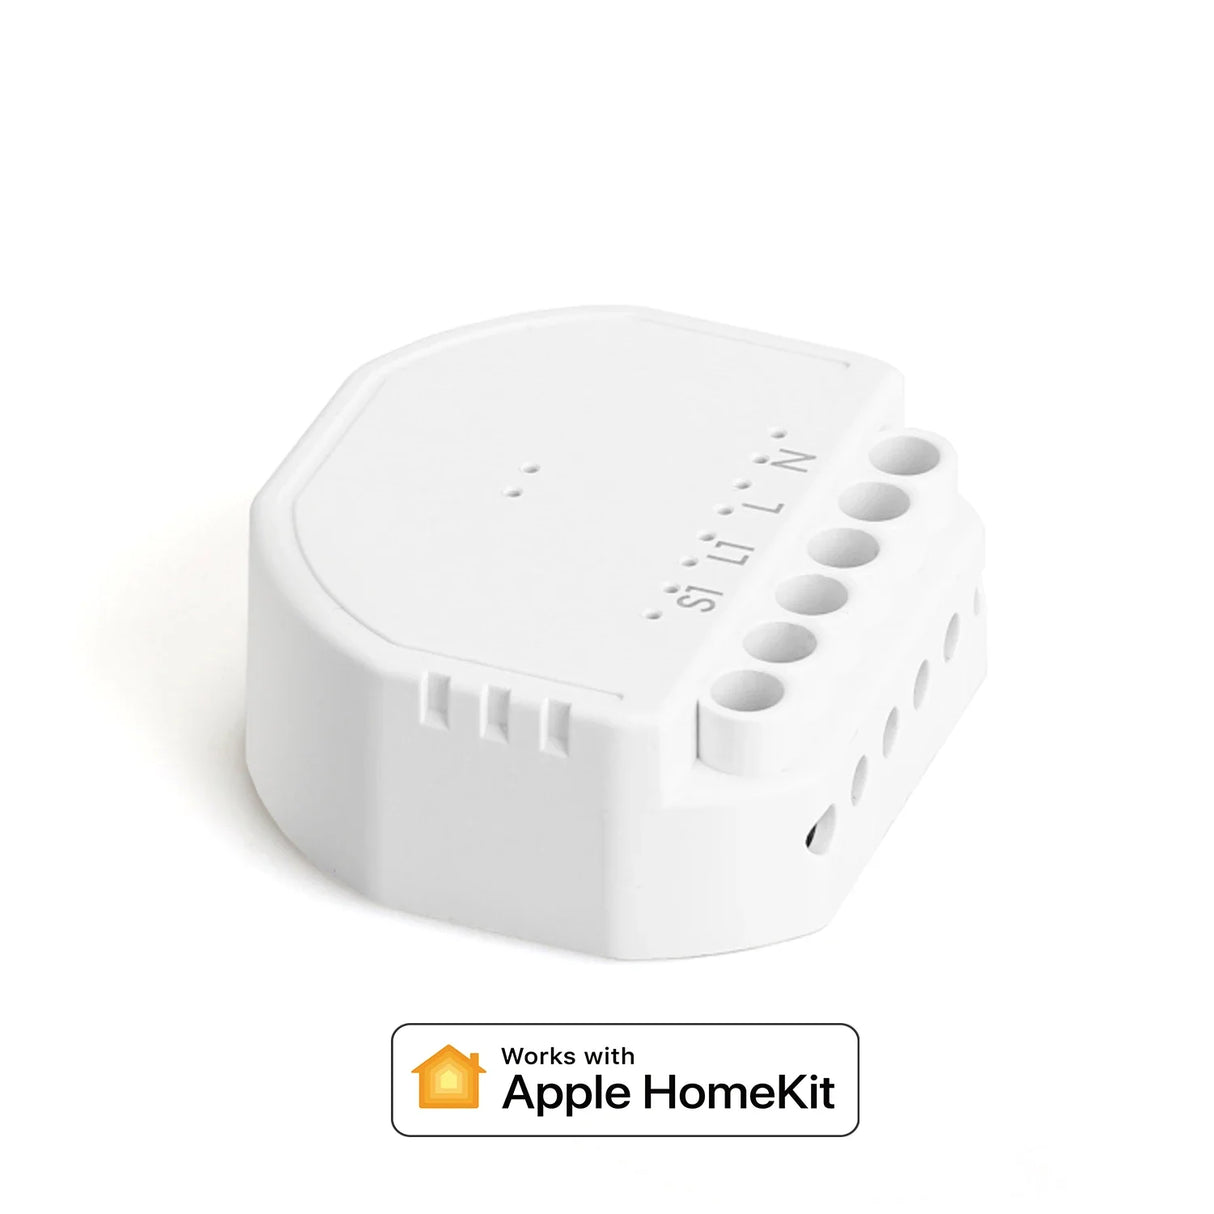 a close up of a white apple homekit with a white background